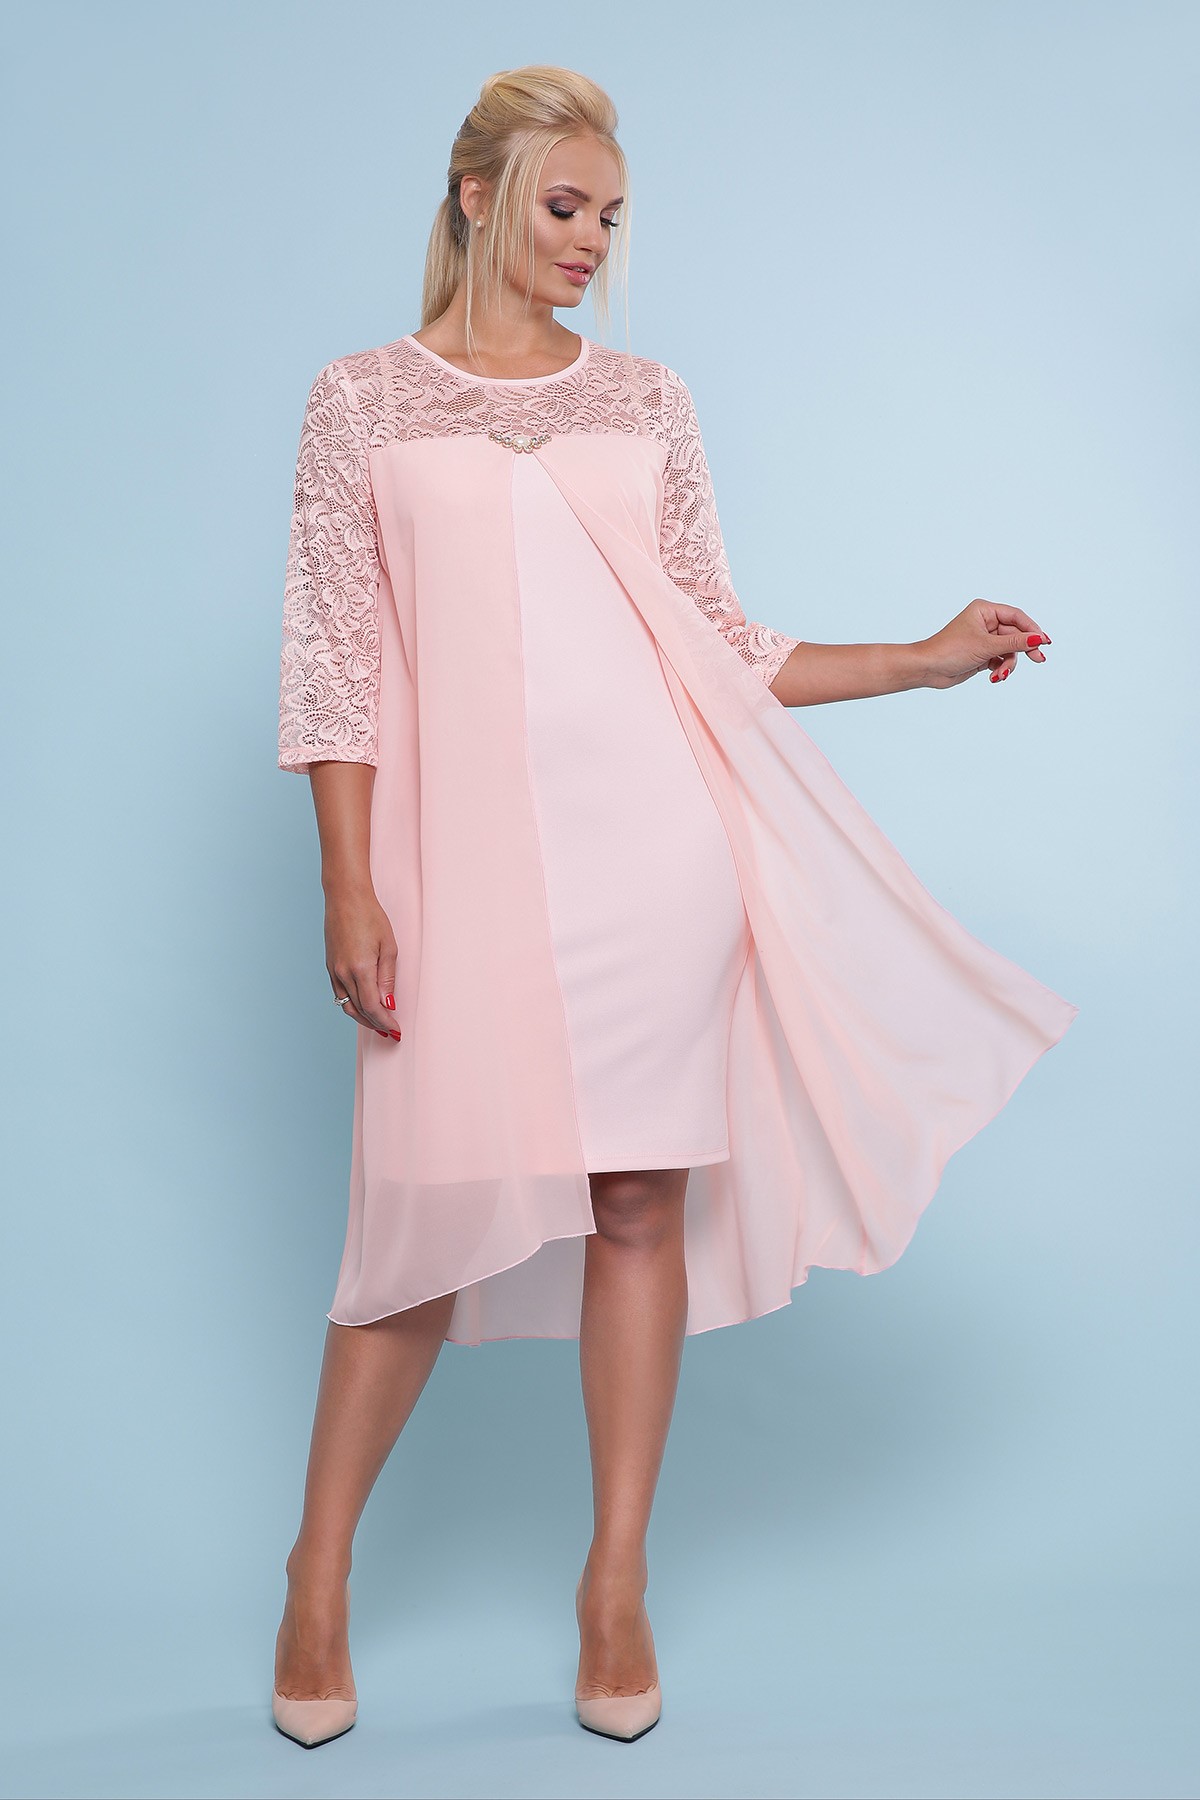 women's dresses for women with plus size